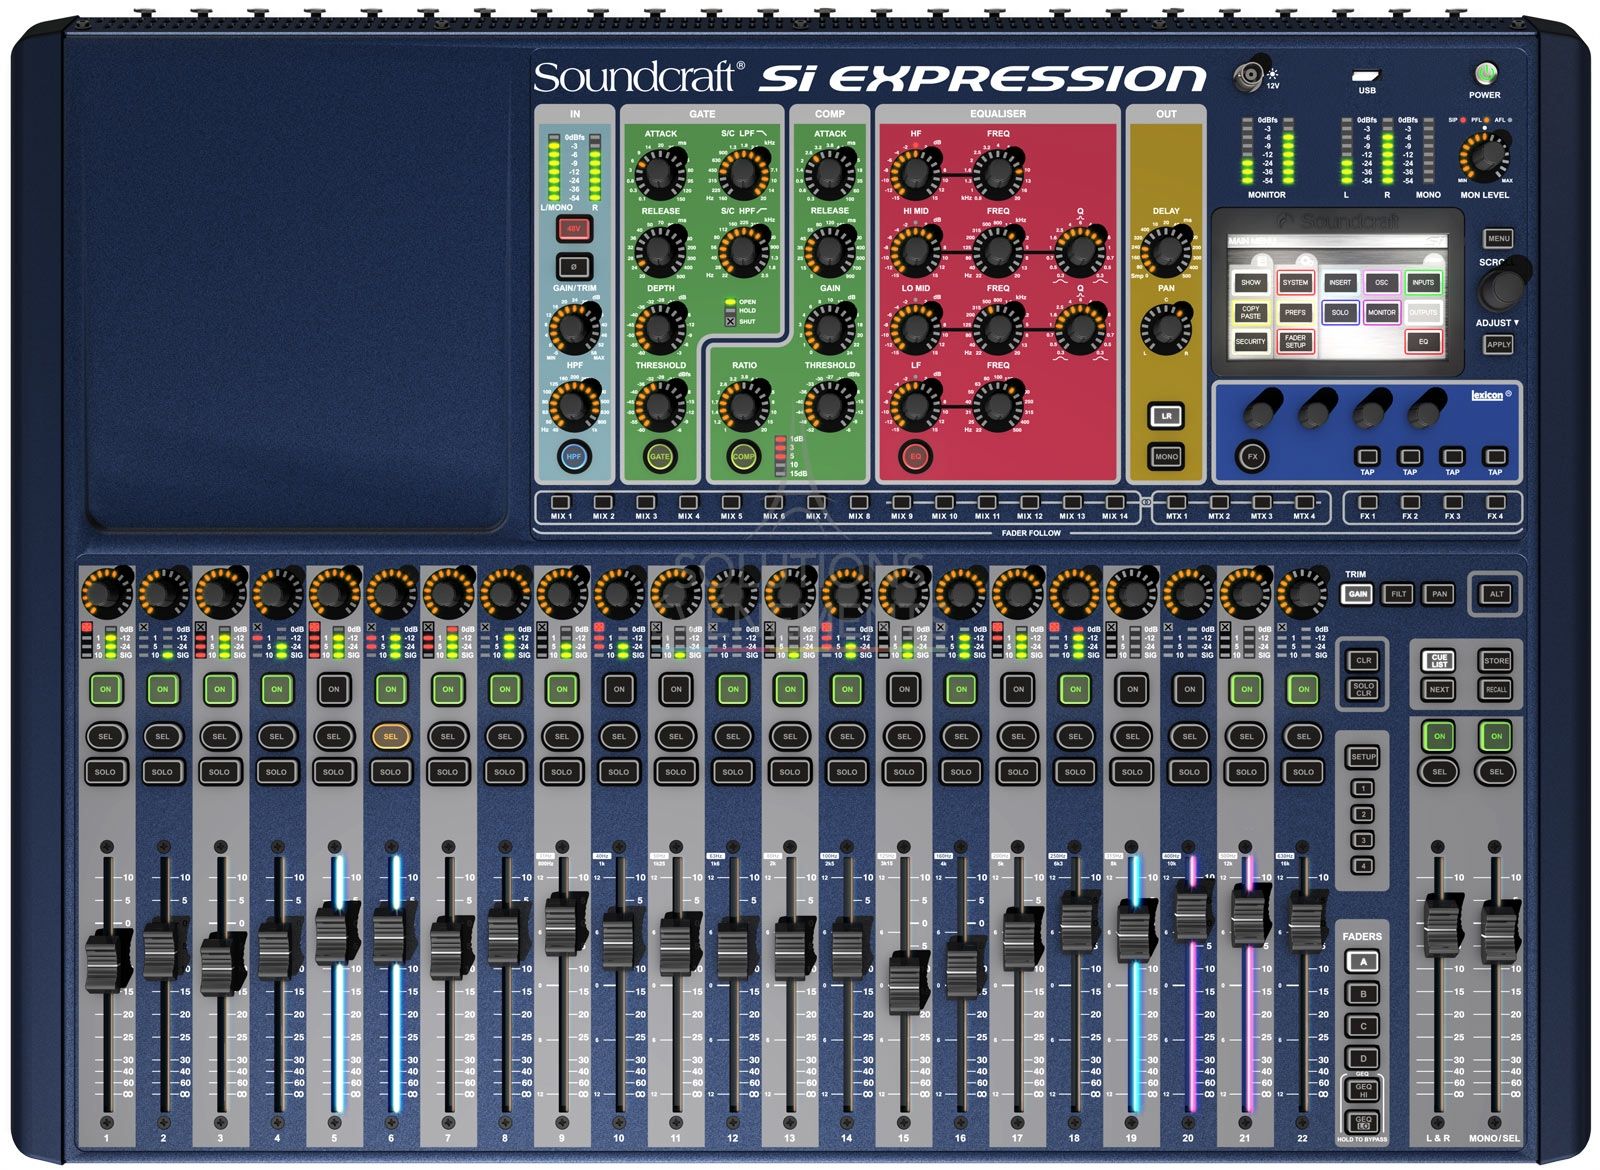 SoundCraft Mixing Console Rental - Si Expression 2